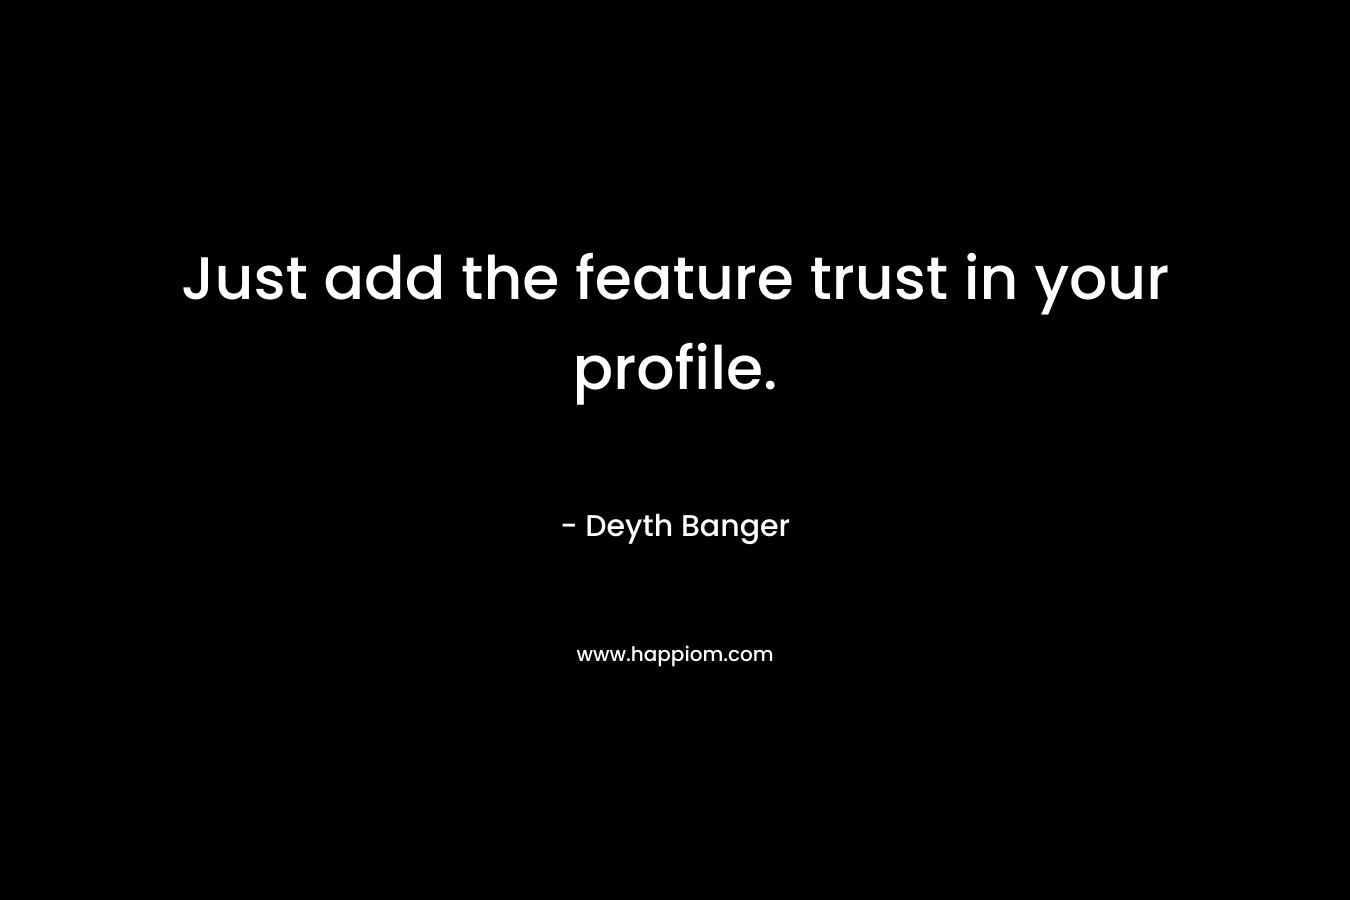 Just add the feature trust in your profile. – Deyth Banger